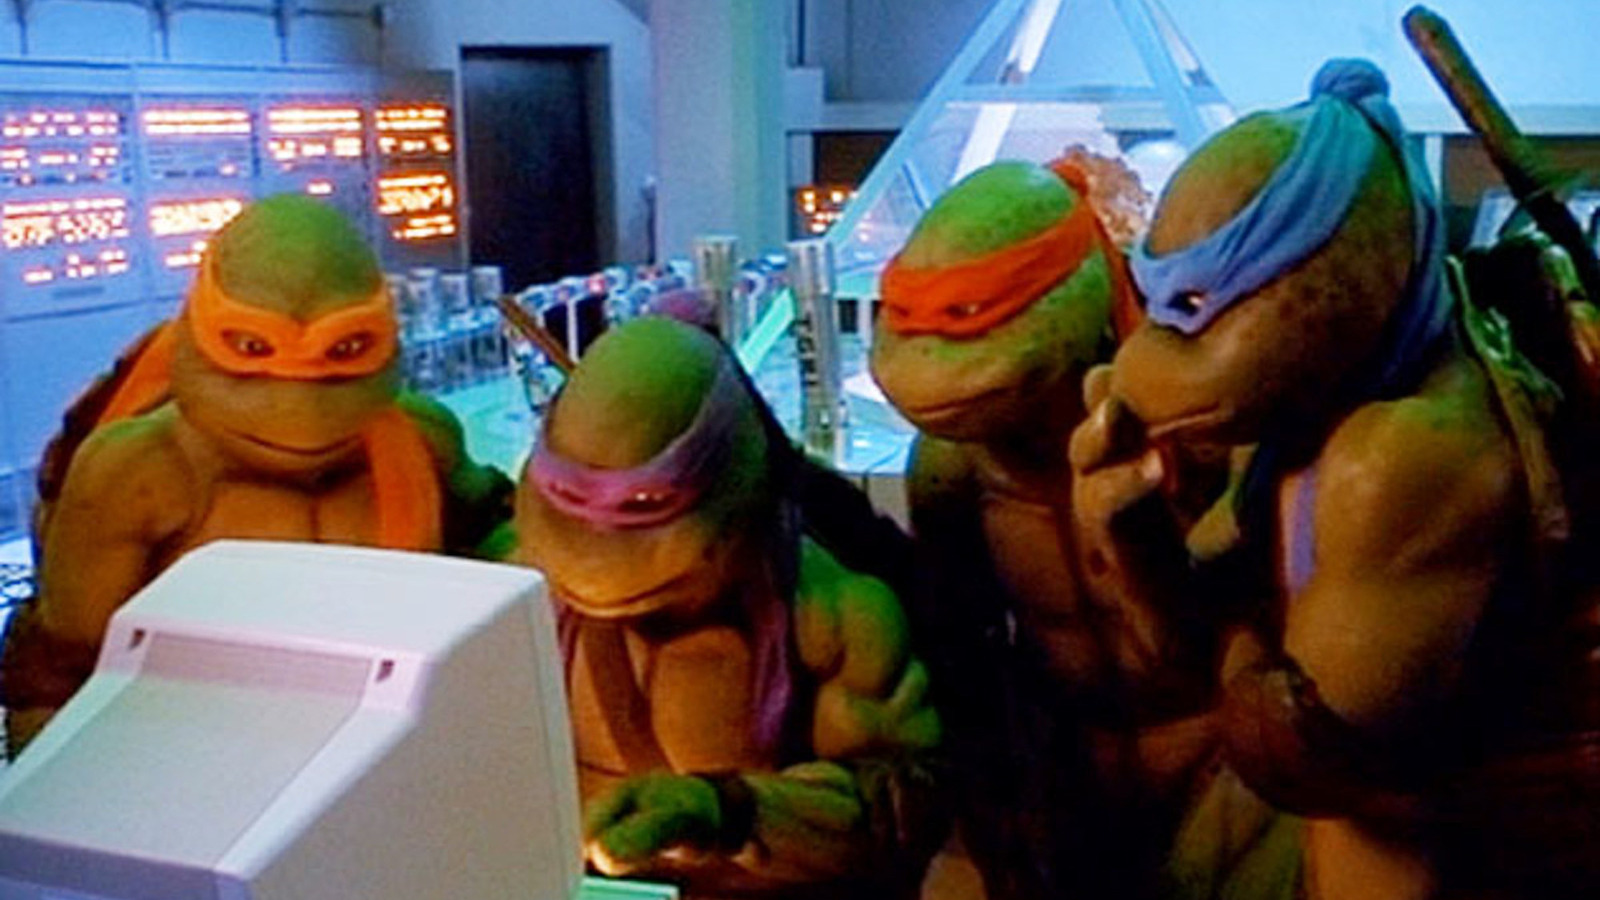 https://www.slashfilm.com/img/gallery/the-daily-stream-teenage-mutant-ninja-turtles-ii-the-secret-of-the-ooze-remains-a-relic-of-a-bizarre-era-of-childrens-entertainment/l-intro-1666224969.jpg